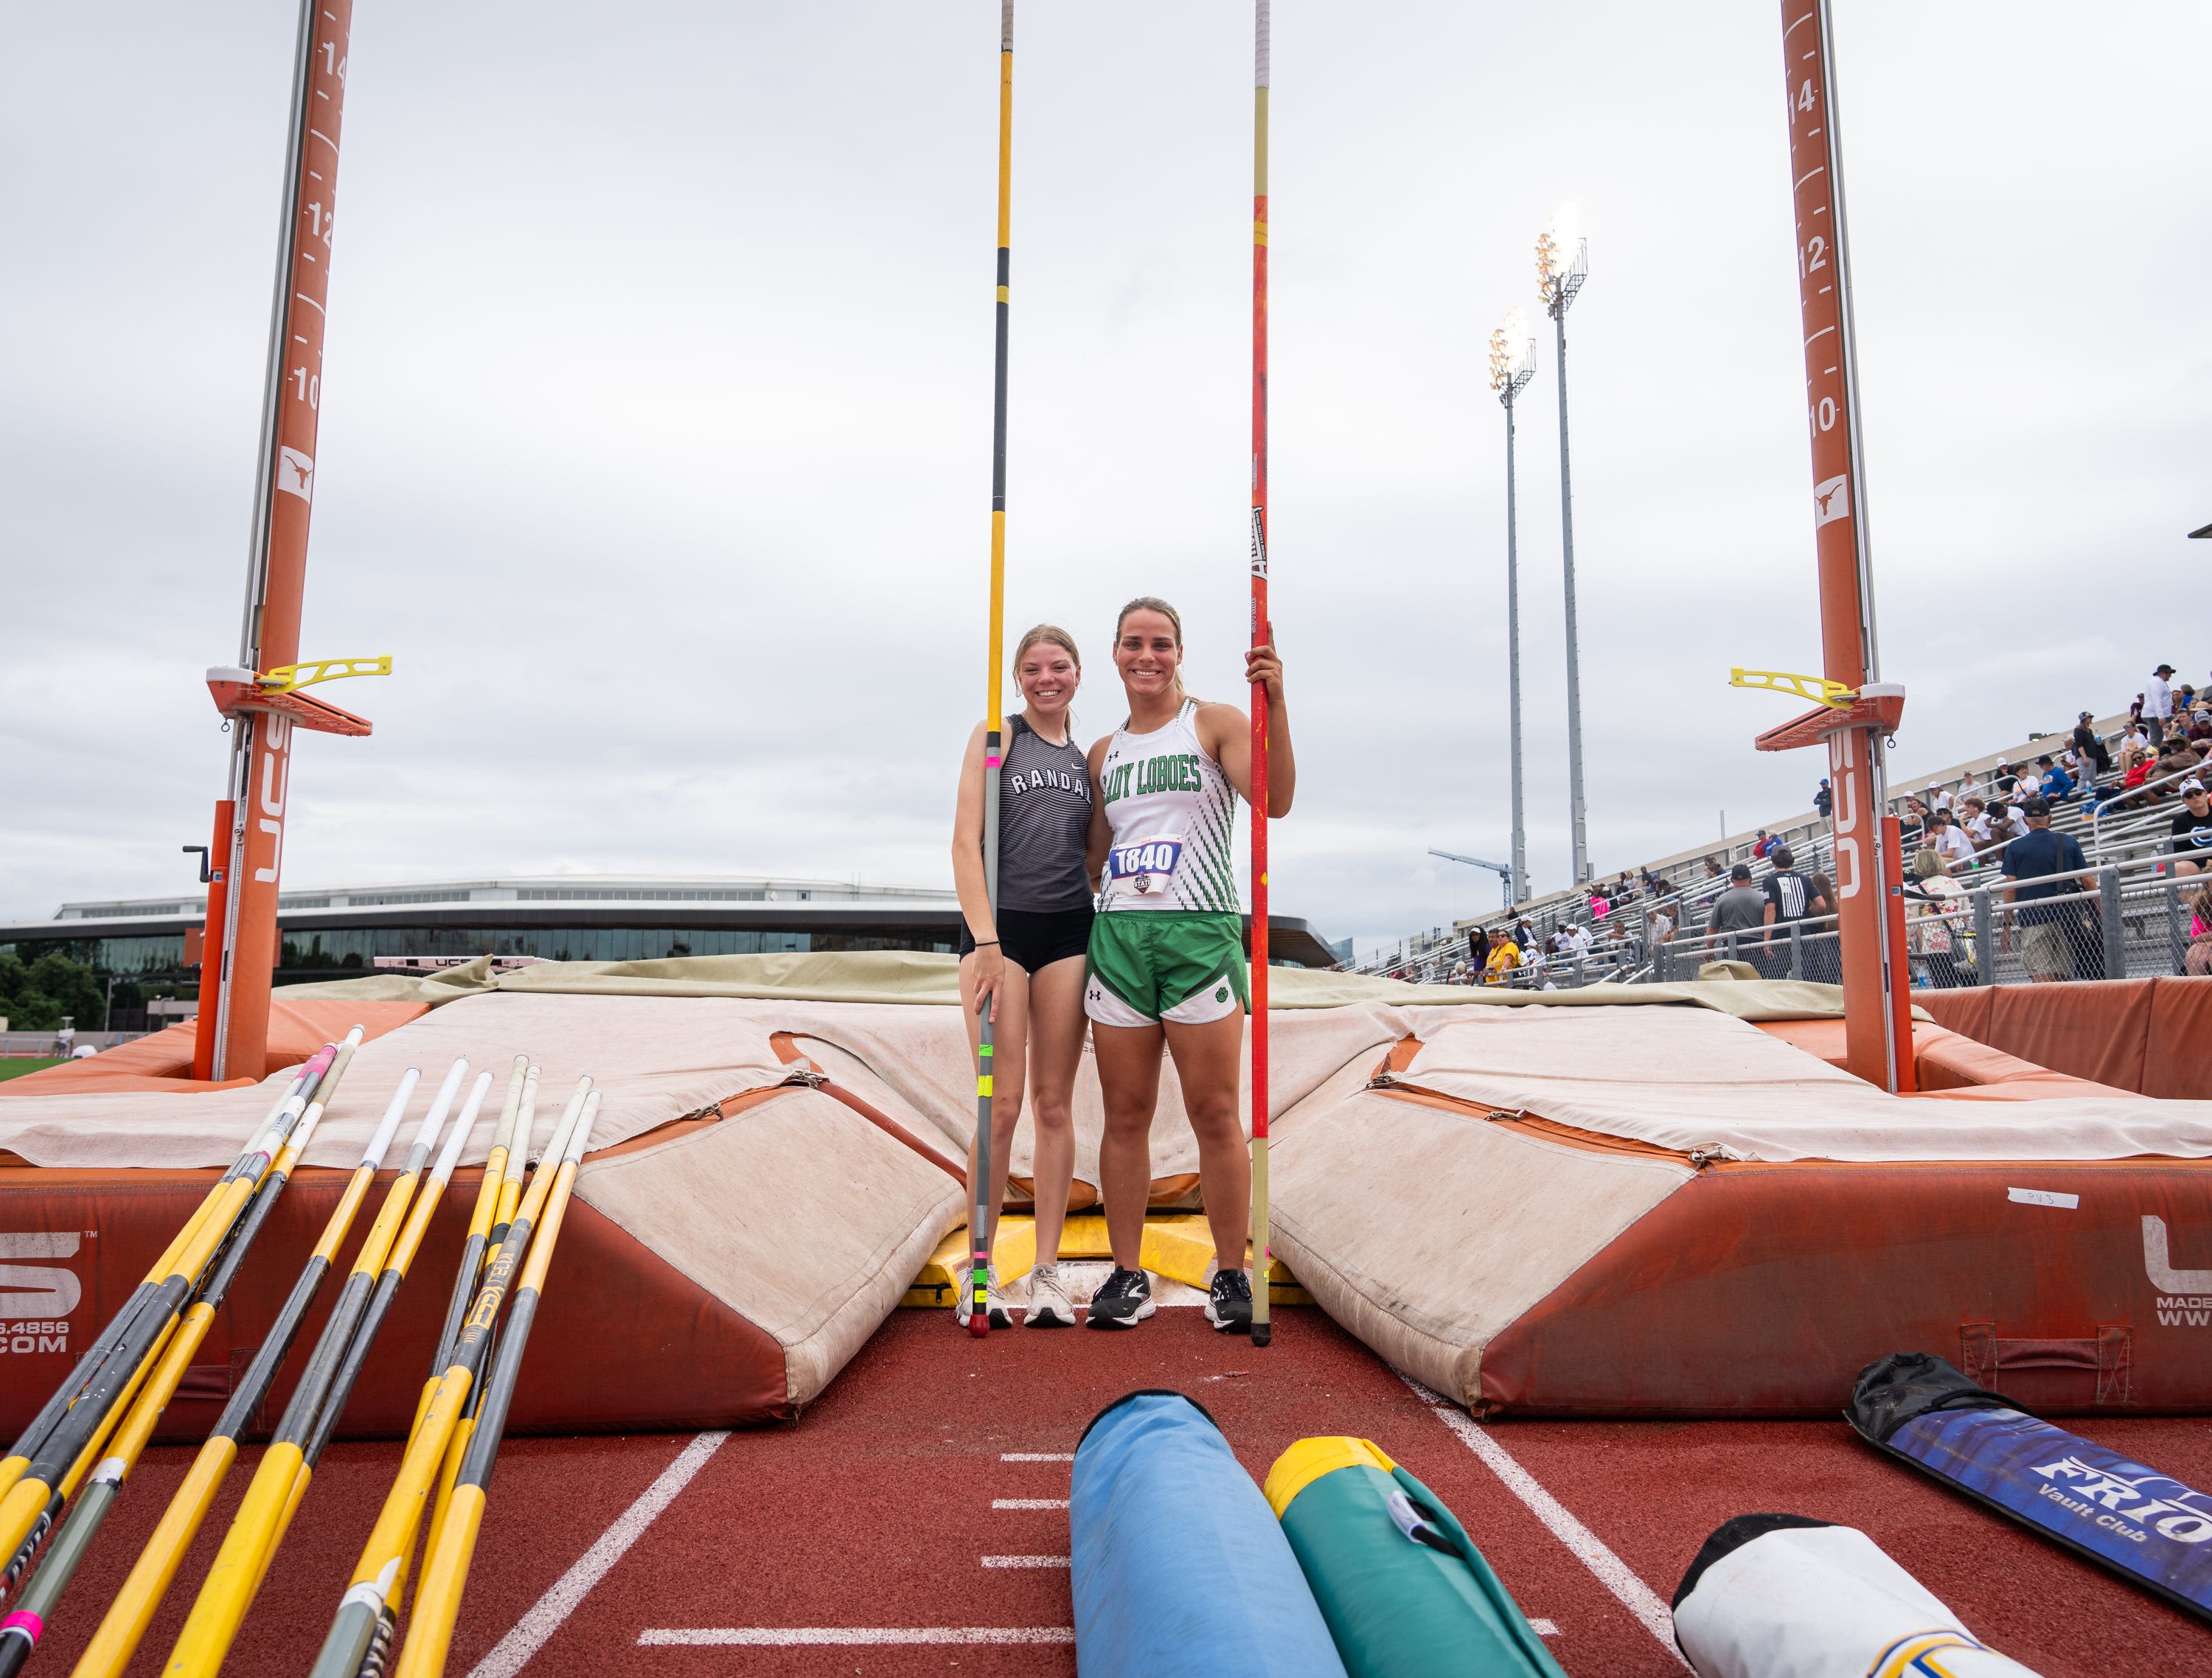 From Russia and Ukraine to the UIL state track meet, two pole vaulters find friendship